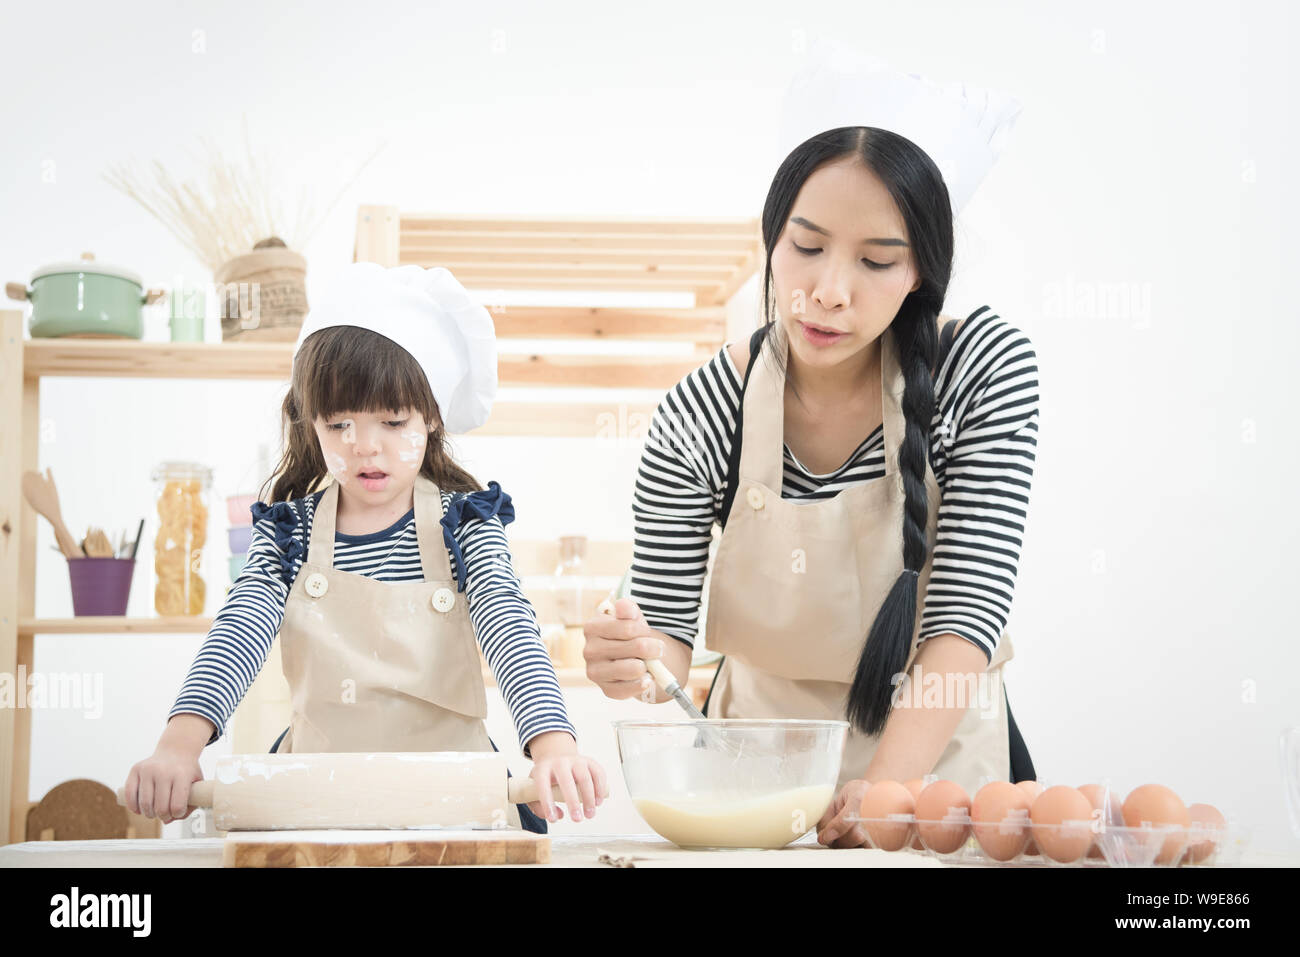 Asian mother and her daughter are preparing the dough to make a cake in the kitchen room on vacation.Photo series of Happy family concept. Stock Photo